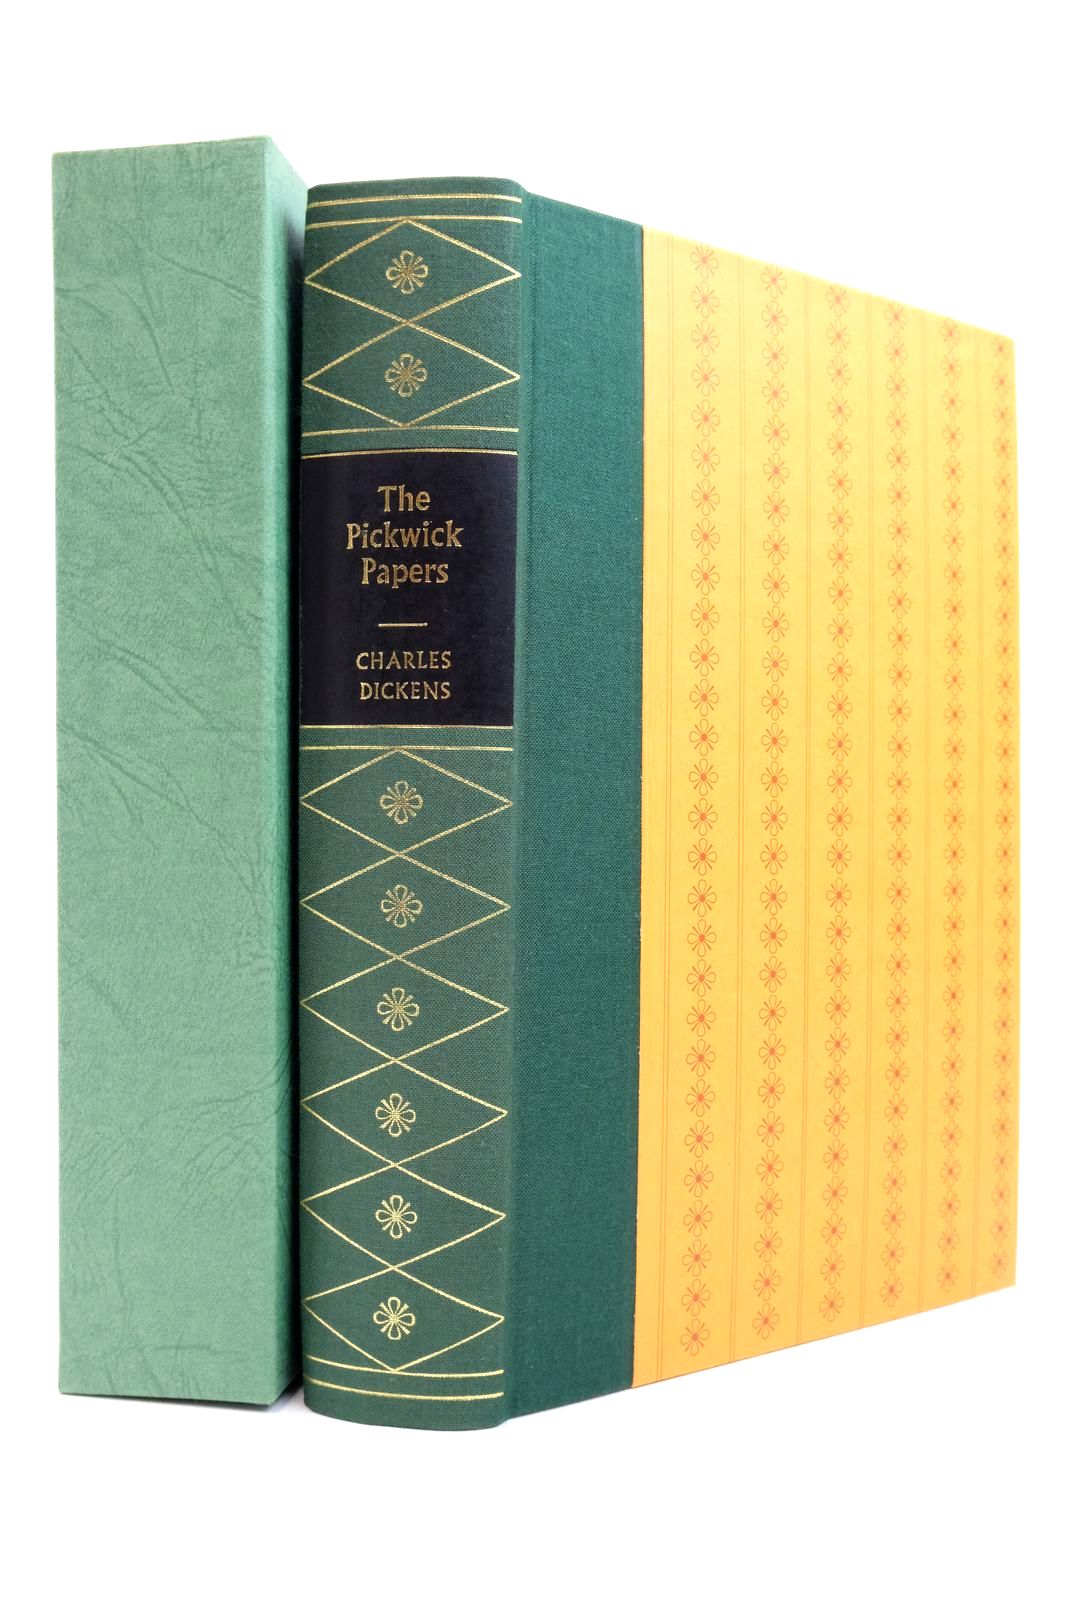 Photo of THE POSTHUMOUS PAPERS OF THE PICKWICK CLUB written by Dickens, Charles illustrated by Keeping, Charles published by Folio Society (STOCK CODE: 2138599)  for sale by Stella & Rose's Books